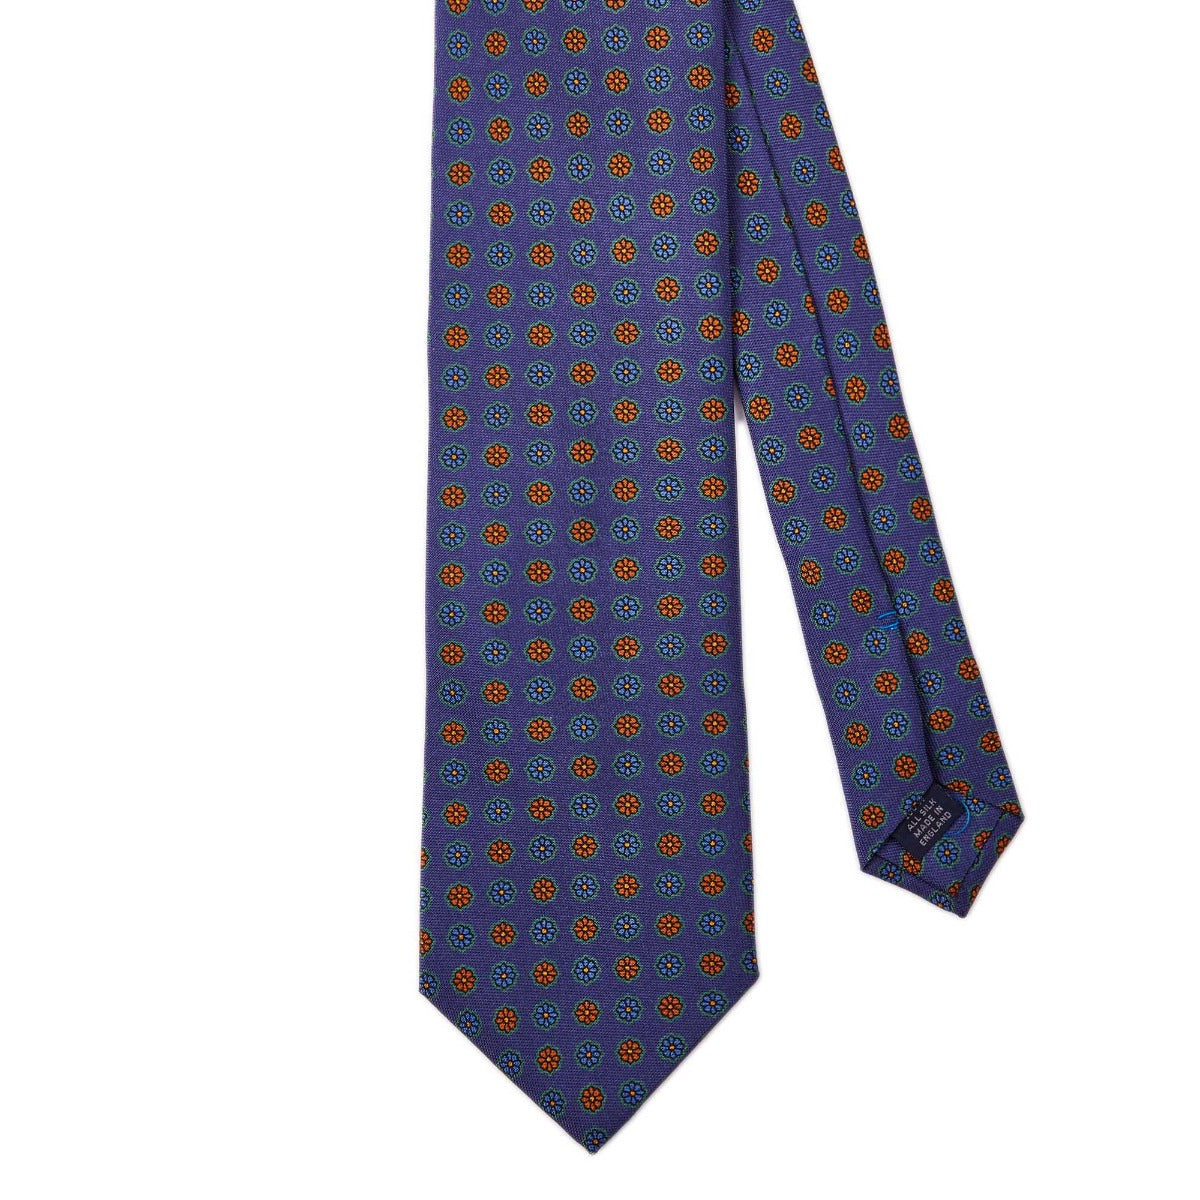 A high-quality Sovereign Grade Blue Medallion Jacquard Silk Tie from KirbyAllison.com with polka dots in blue and orange.